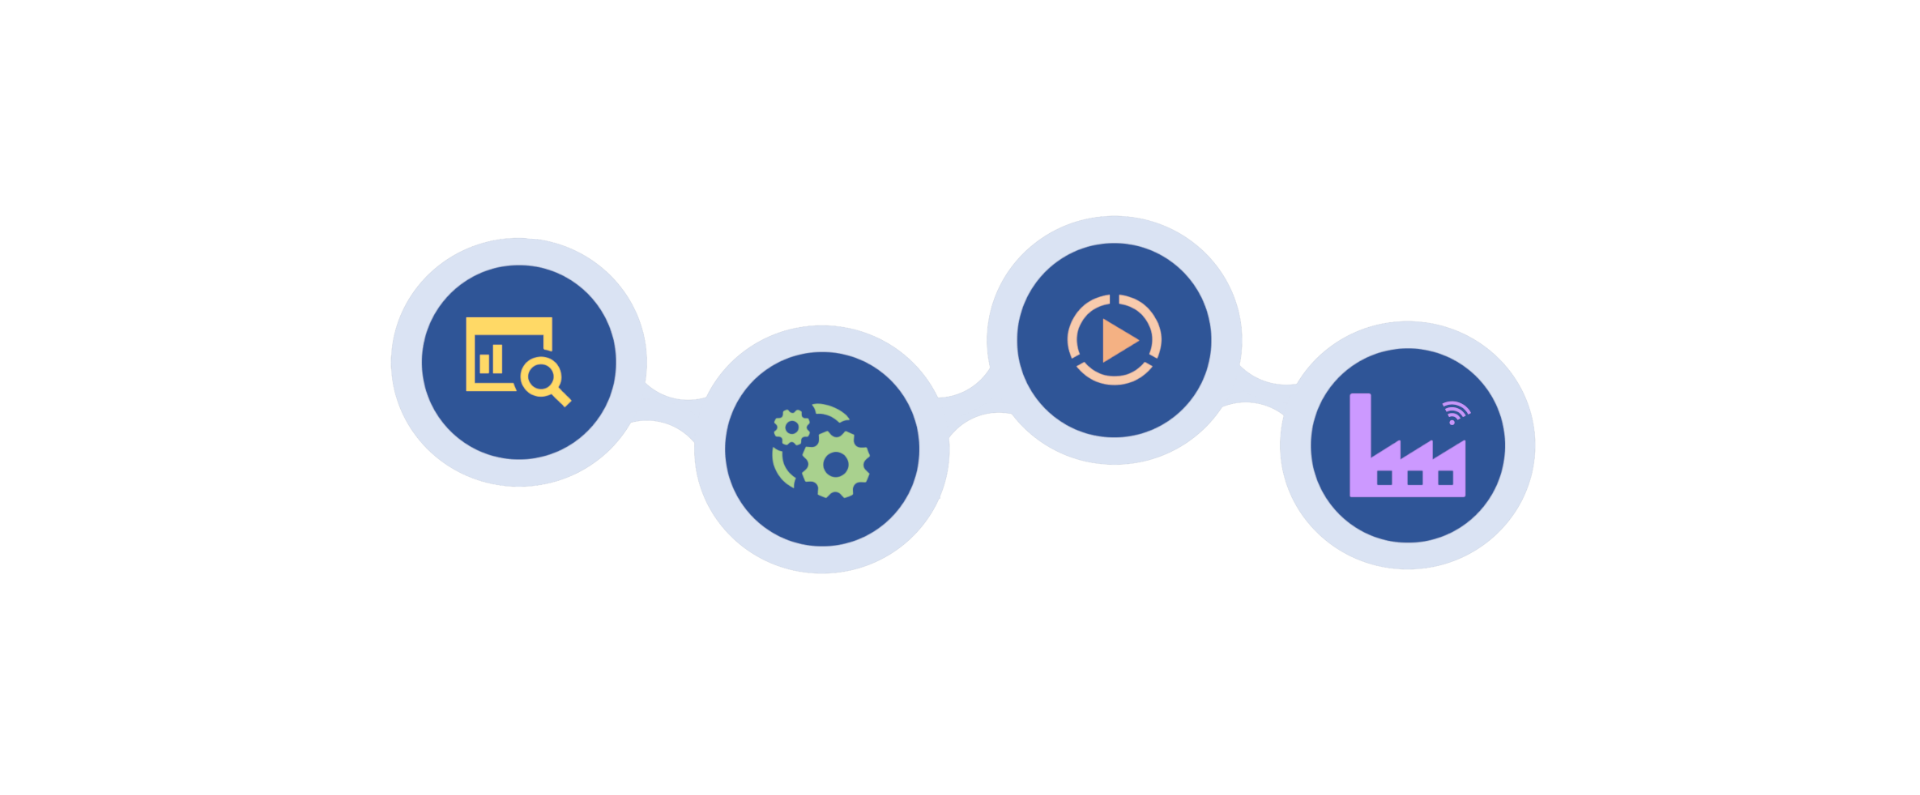 Implementation phases